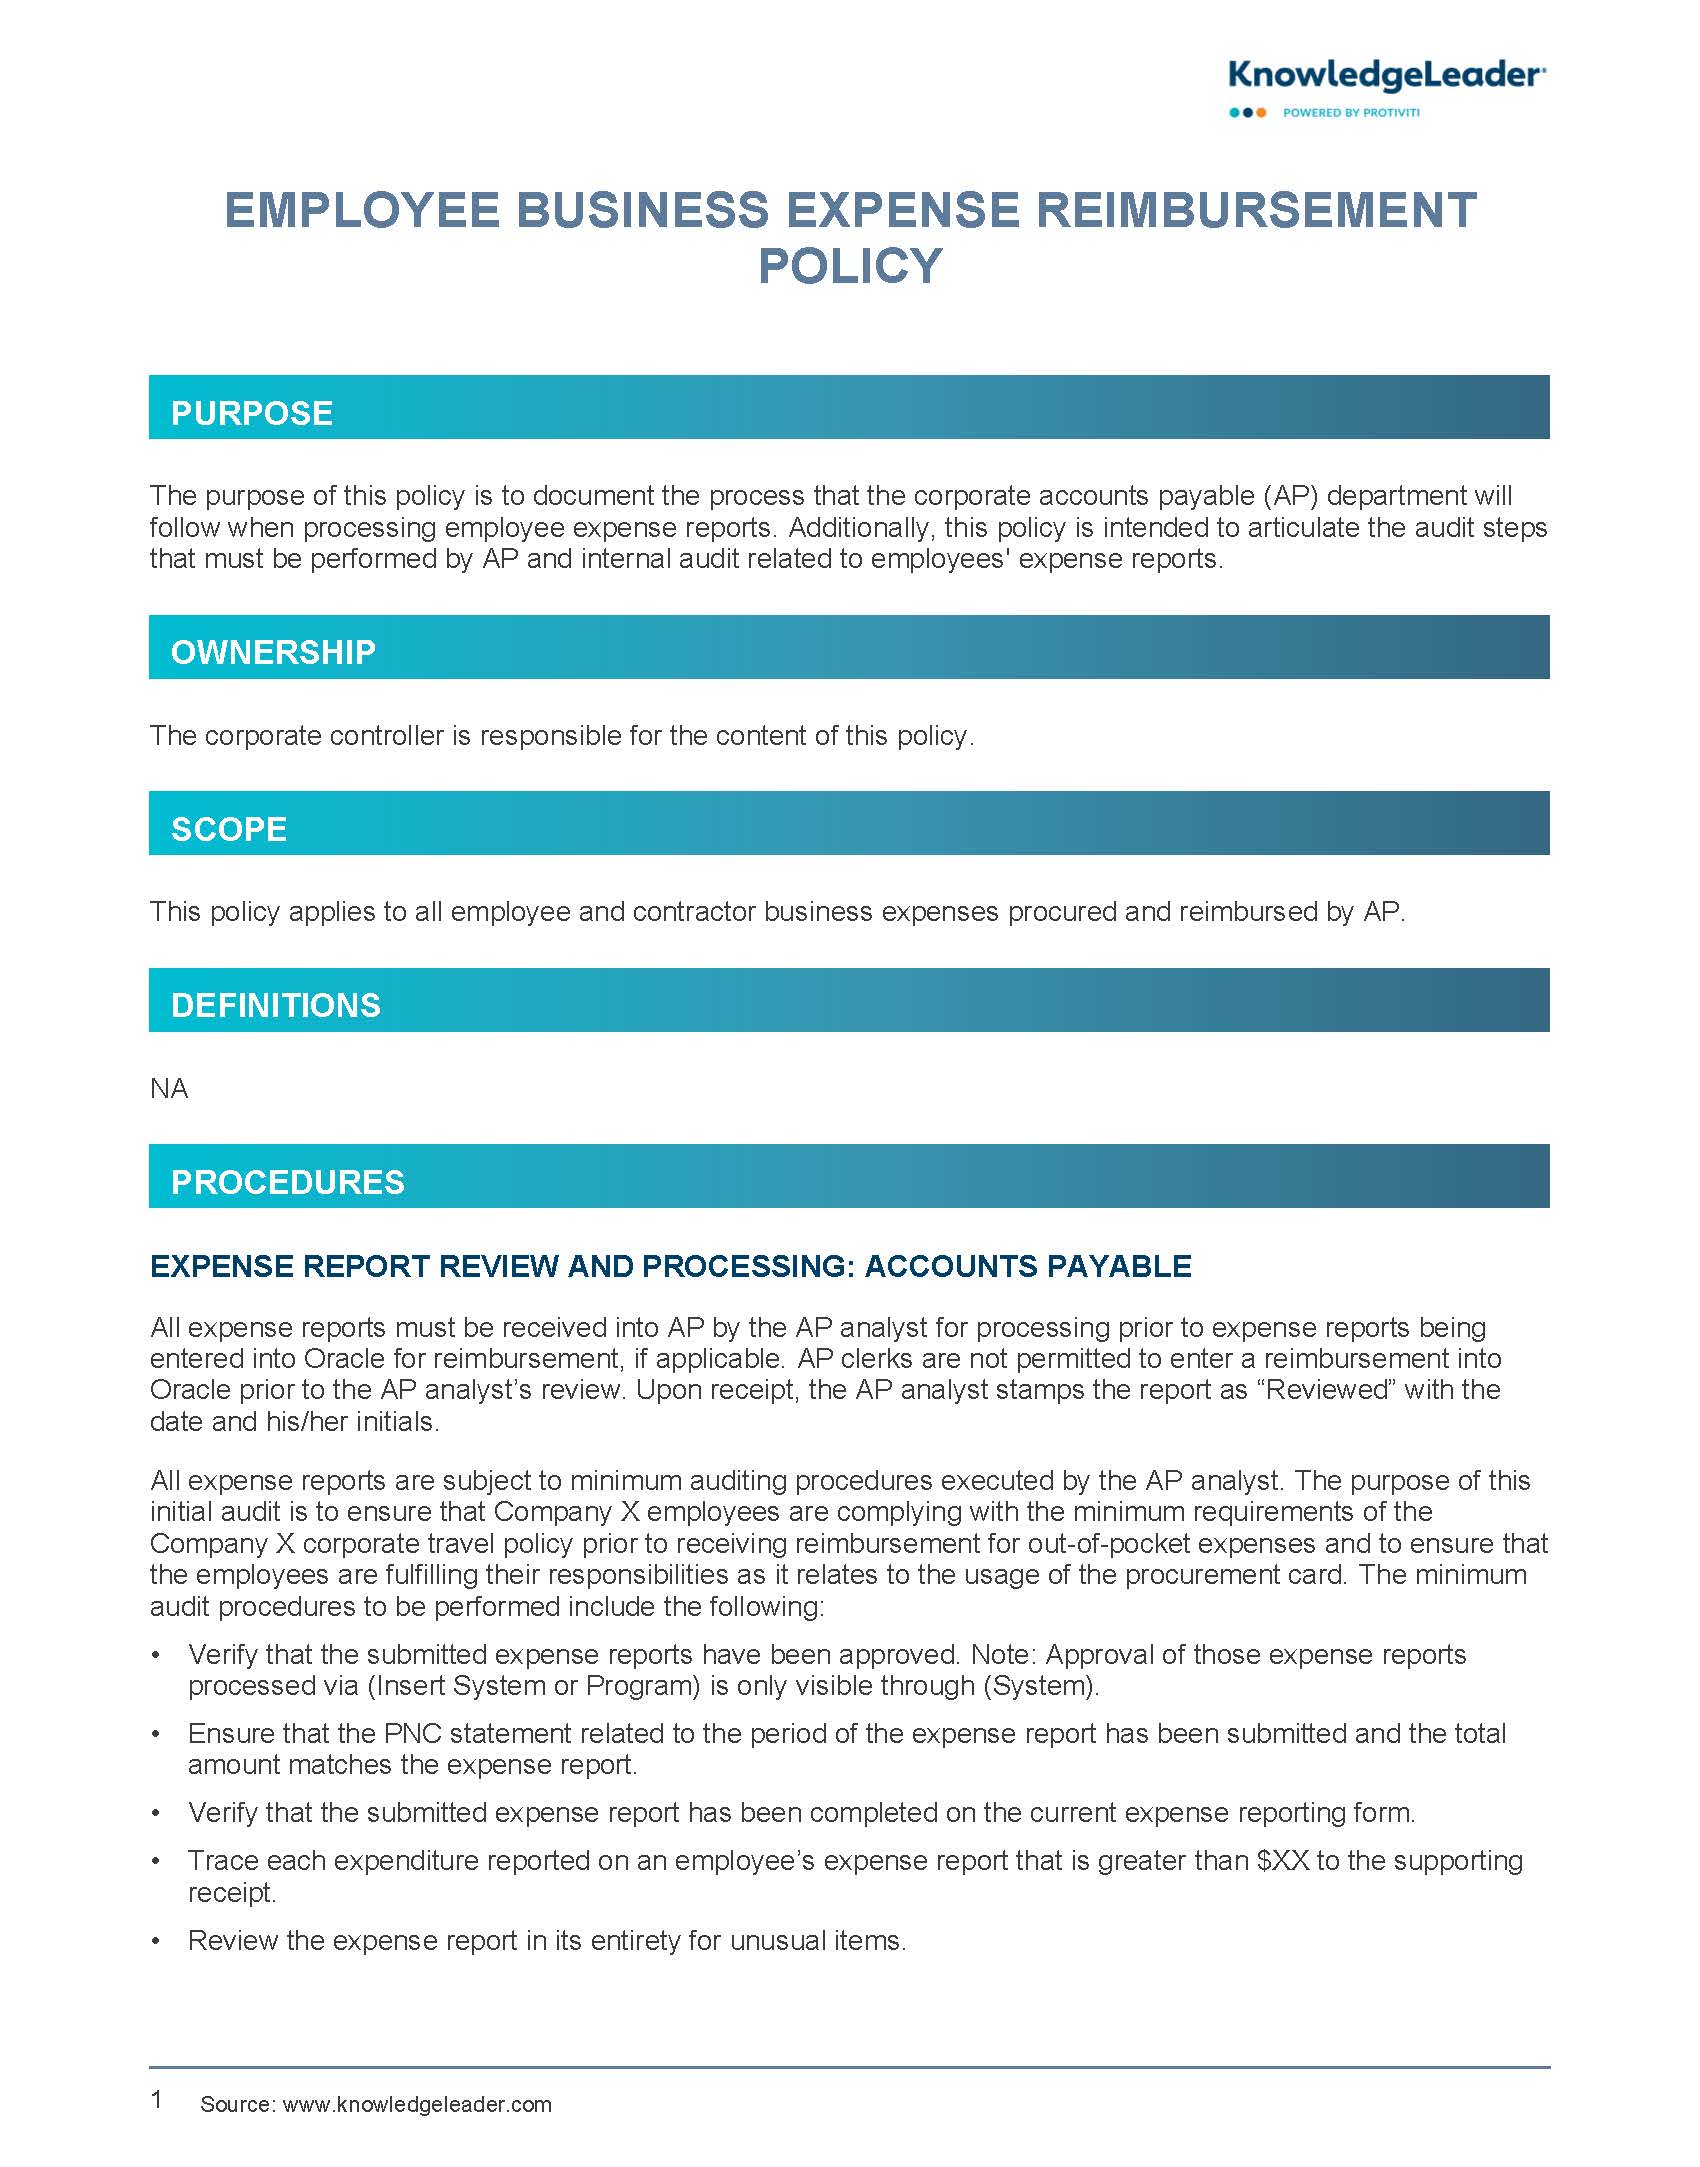 Screenshot of the first page of Employee Business Expense Reimbursement Policy